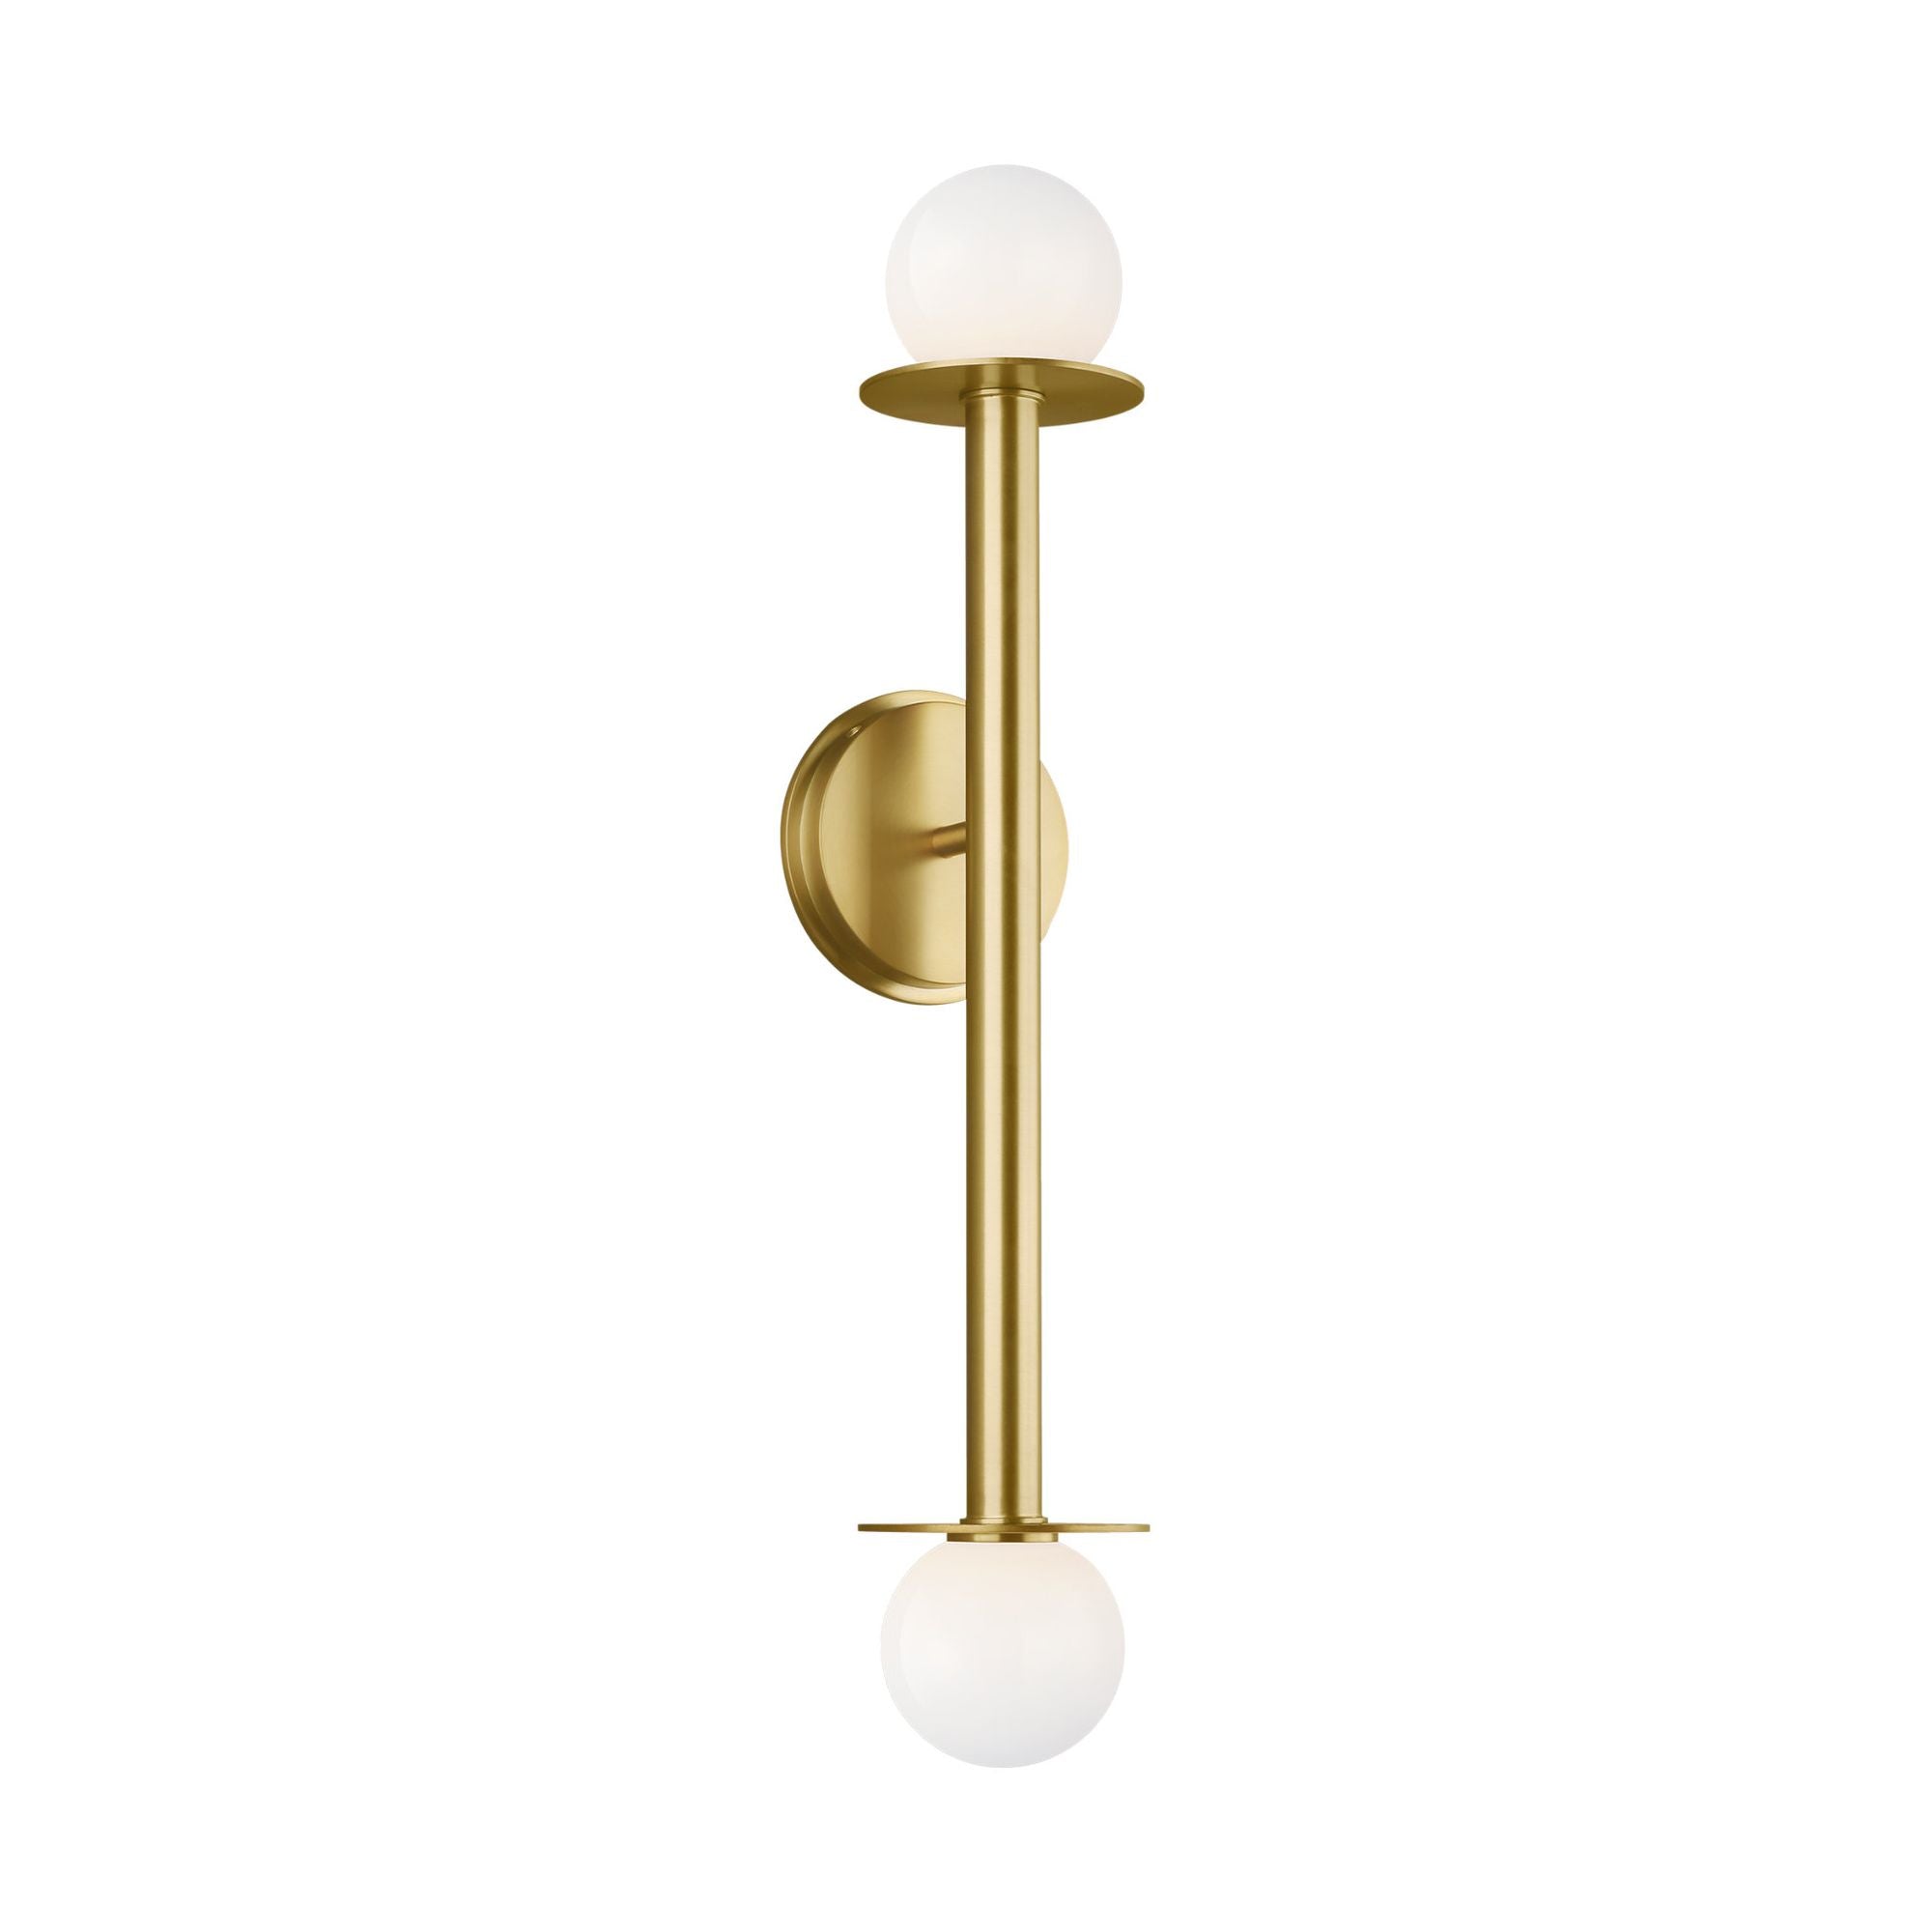 Kelly Wearstler Nodes Double Sconce in Burnished Brass